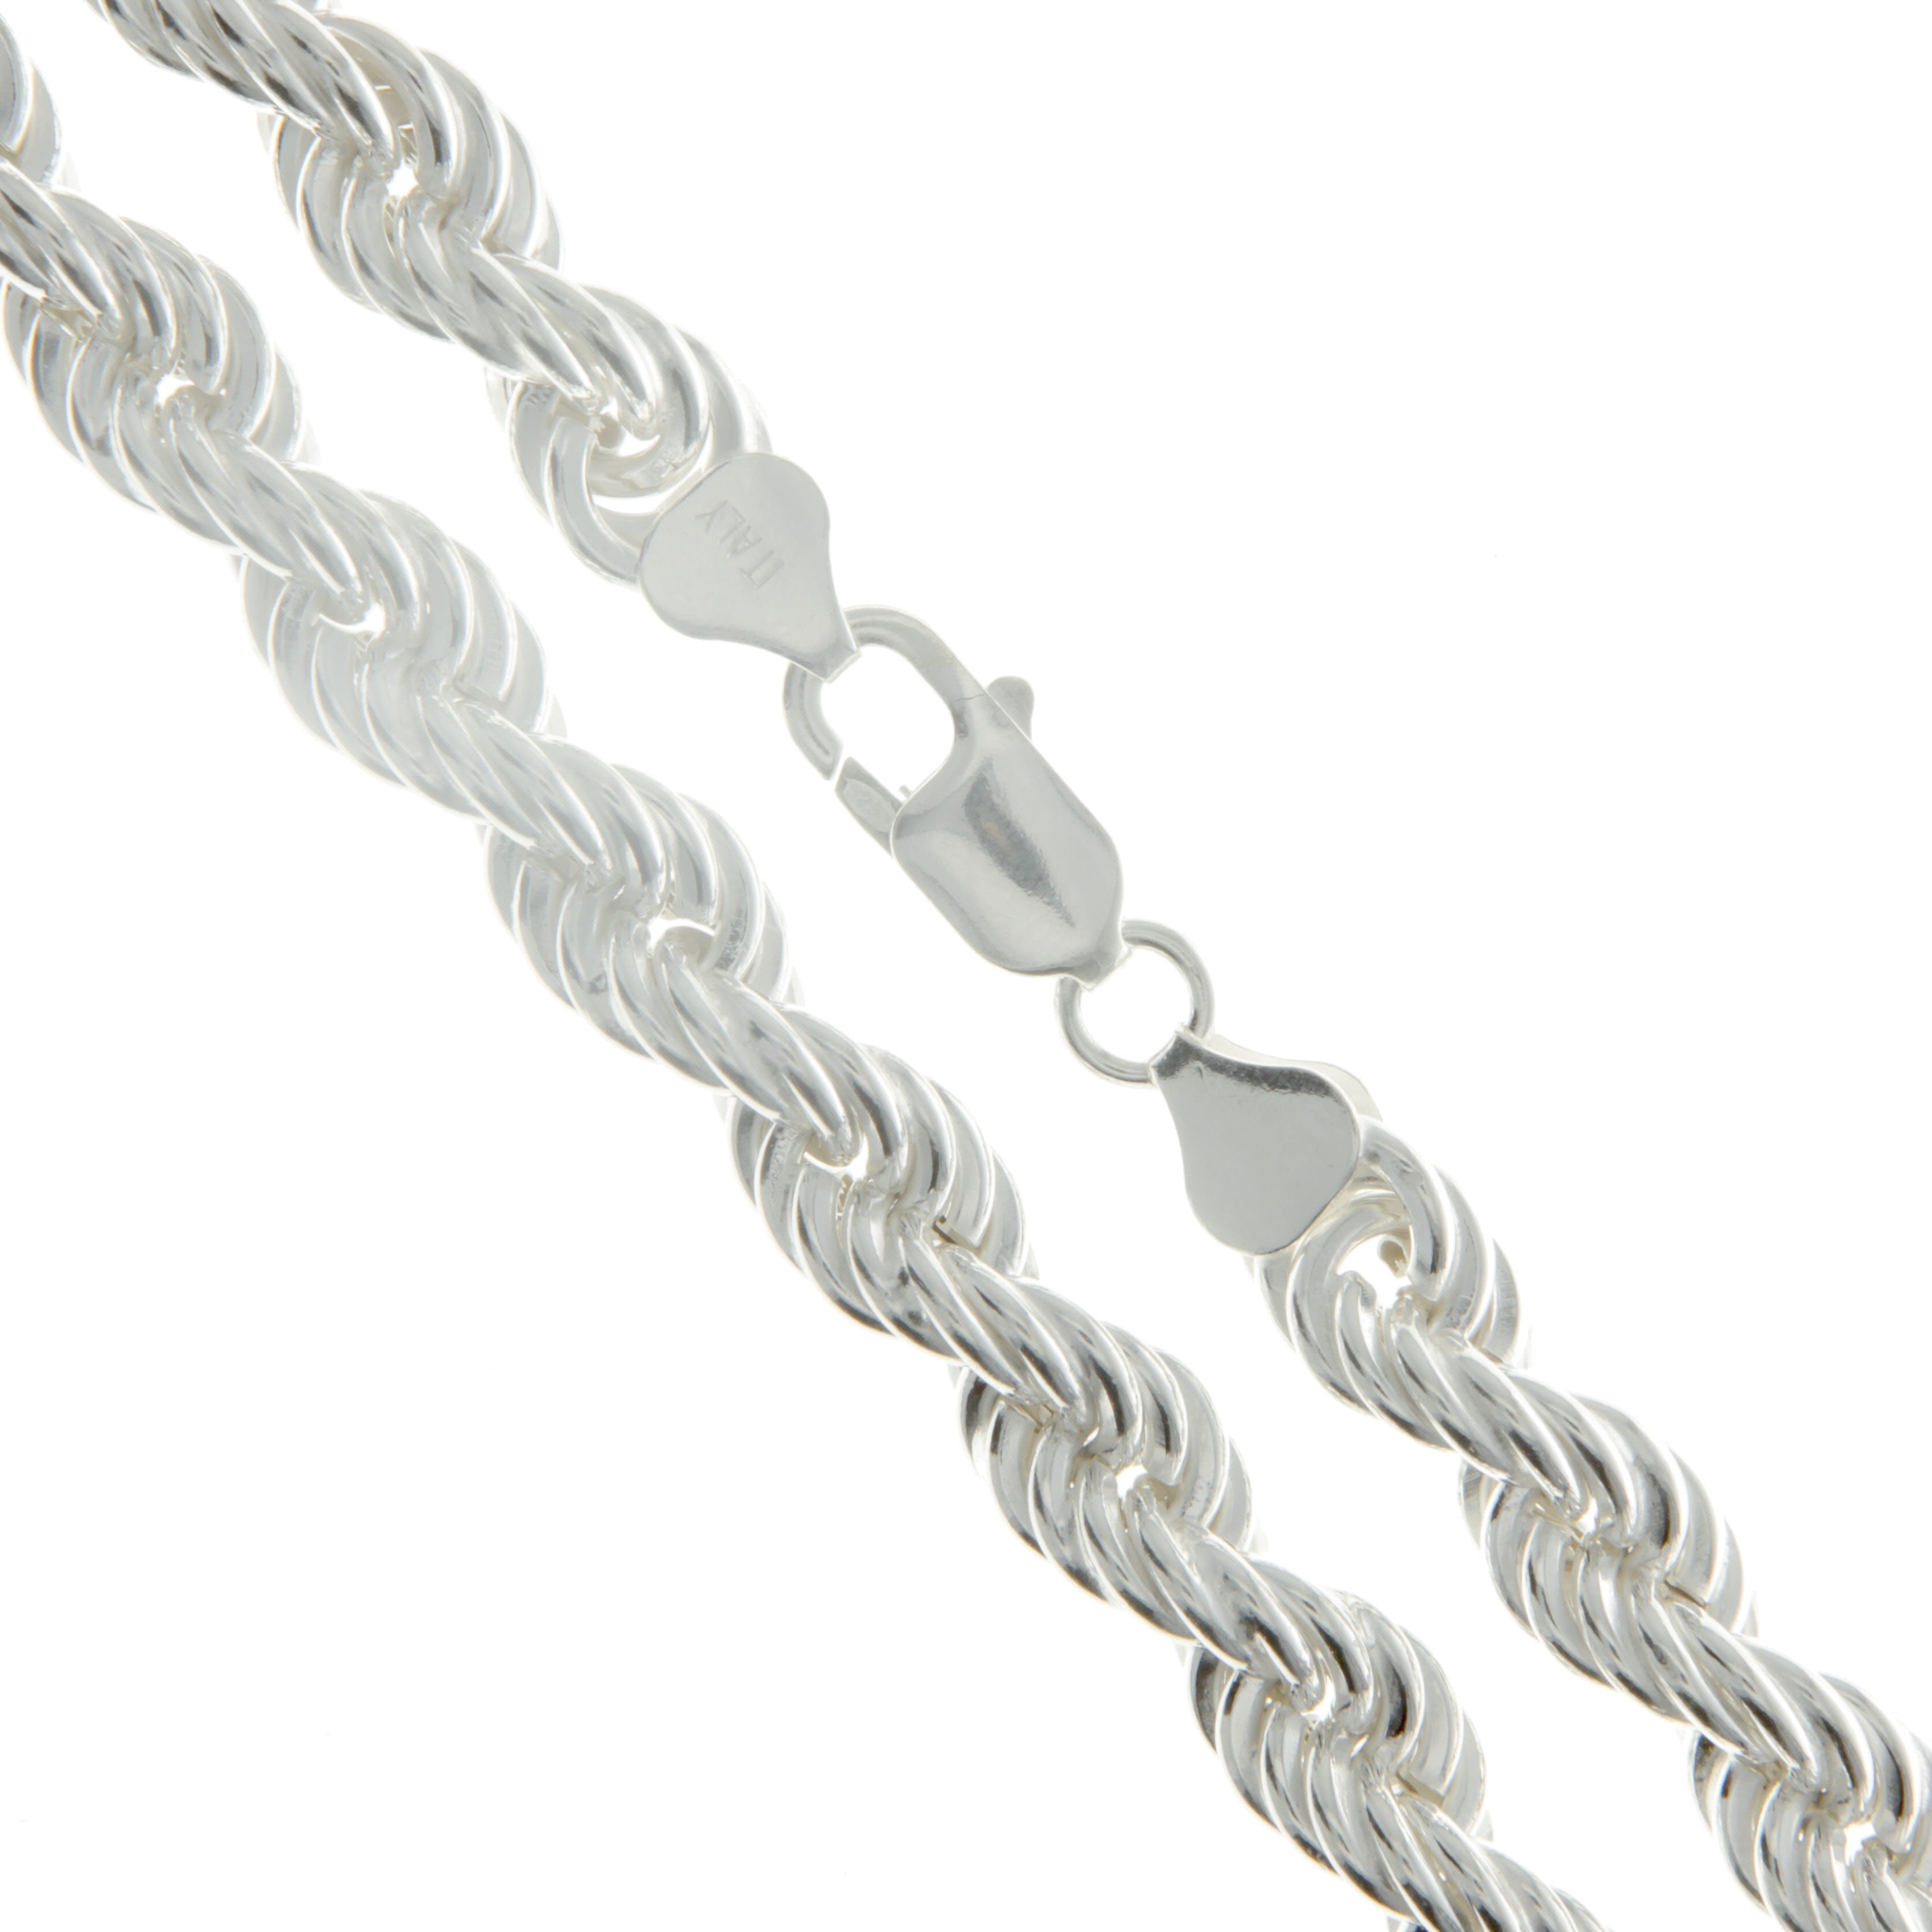 21"x 2mm STAINLESS STEEL SILVER ROPE CHAIN NECKLACE 7g/E596